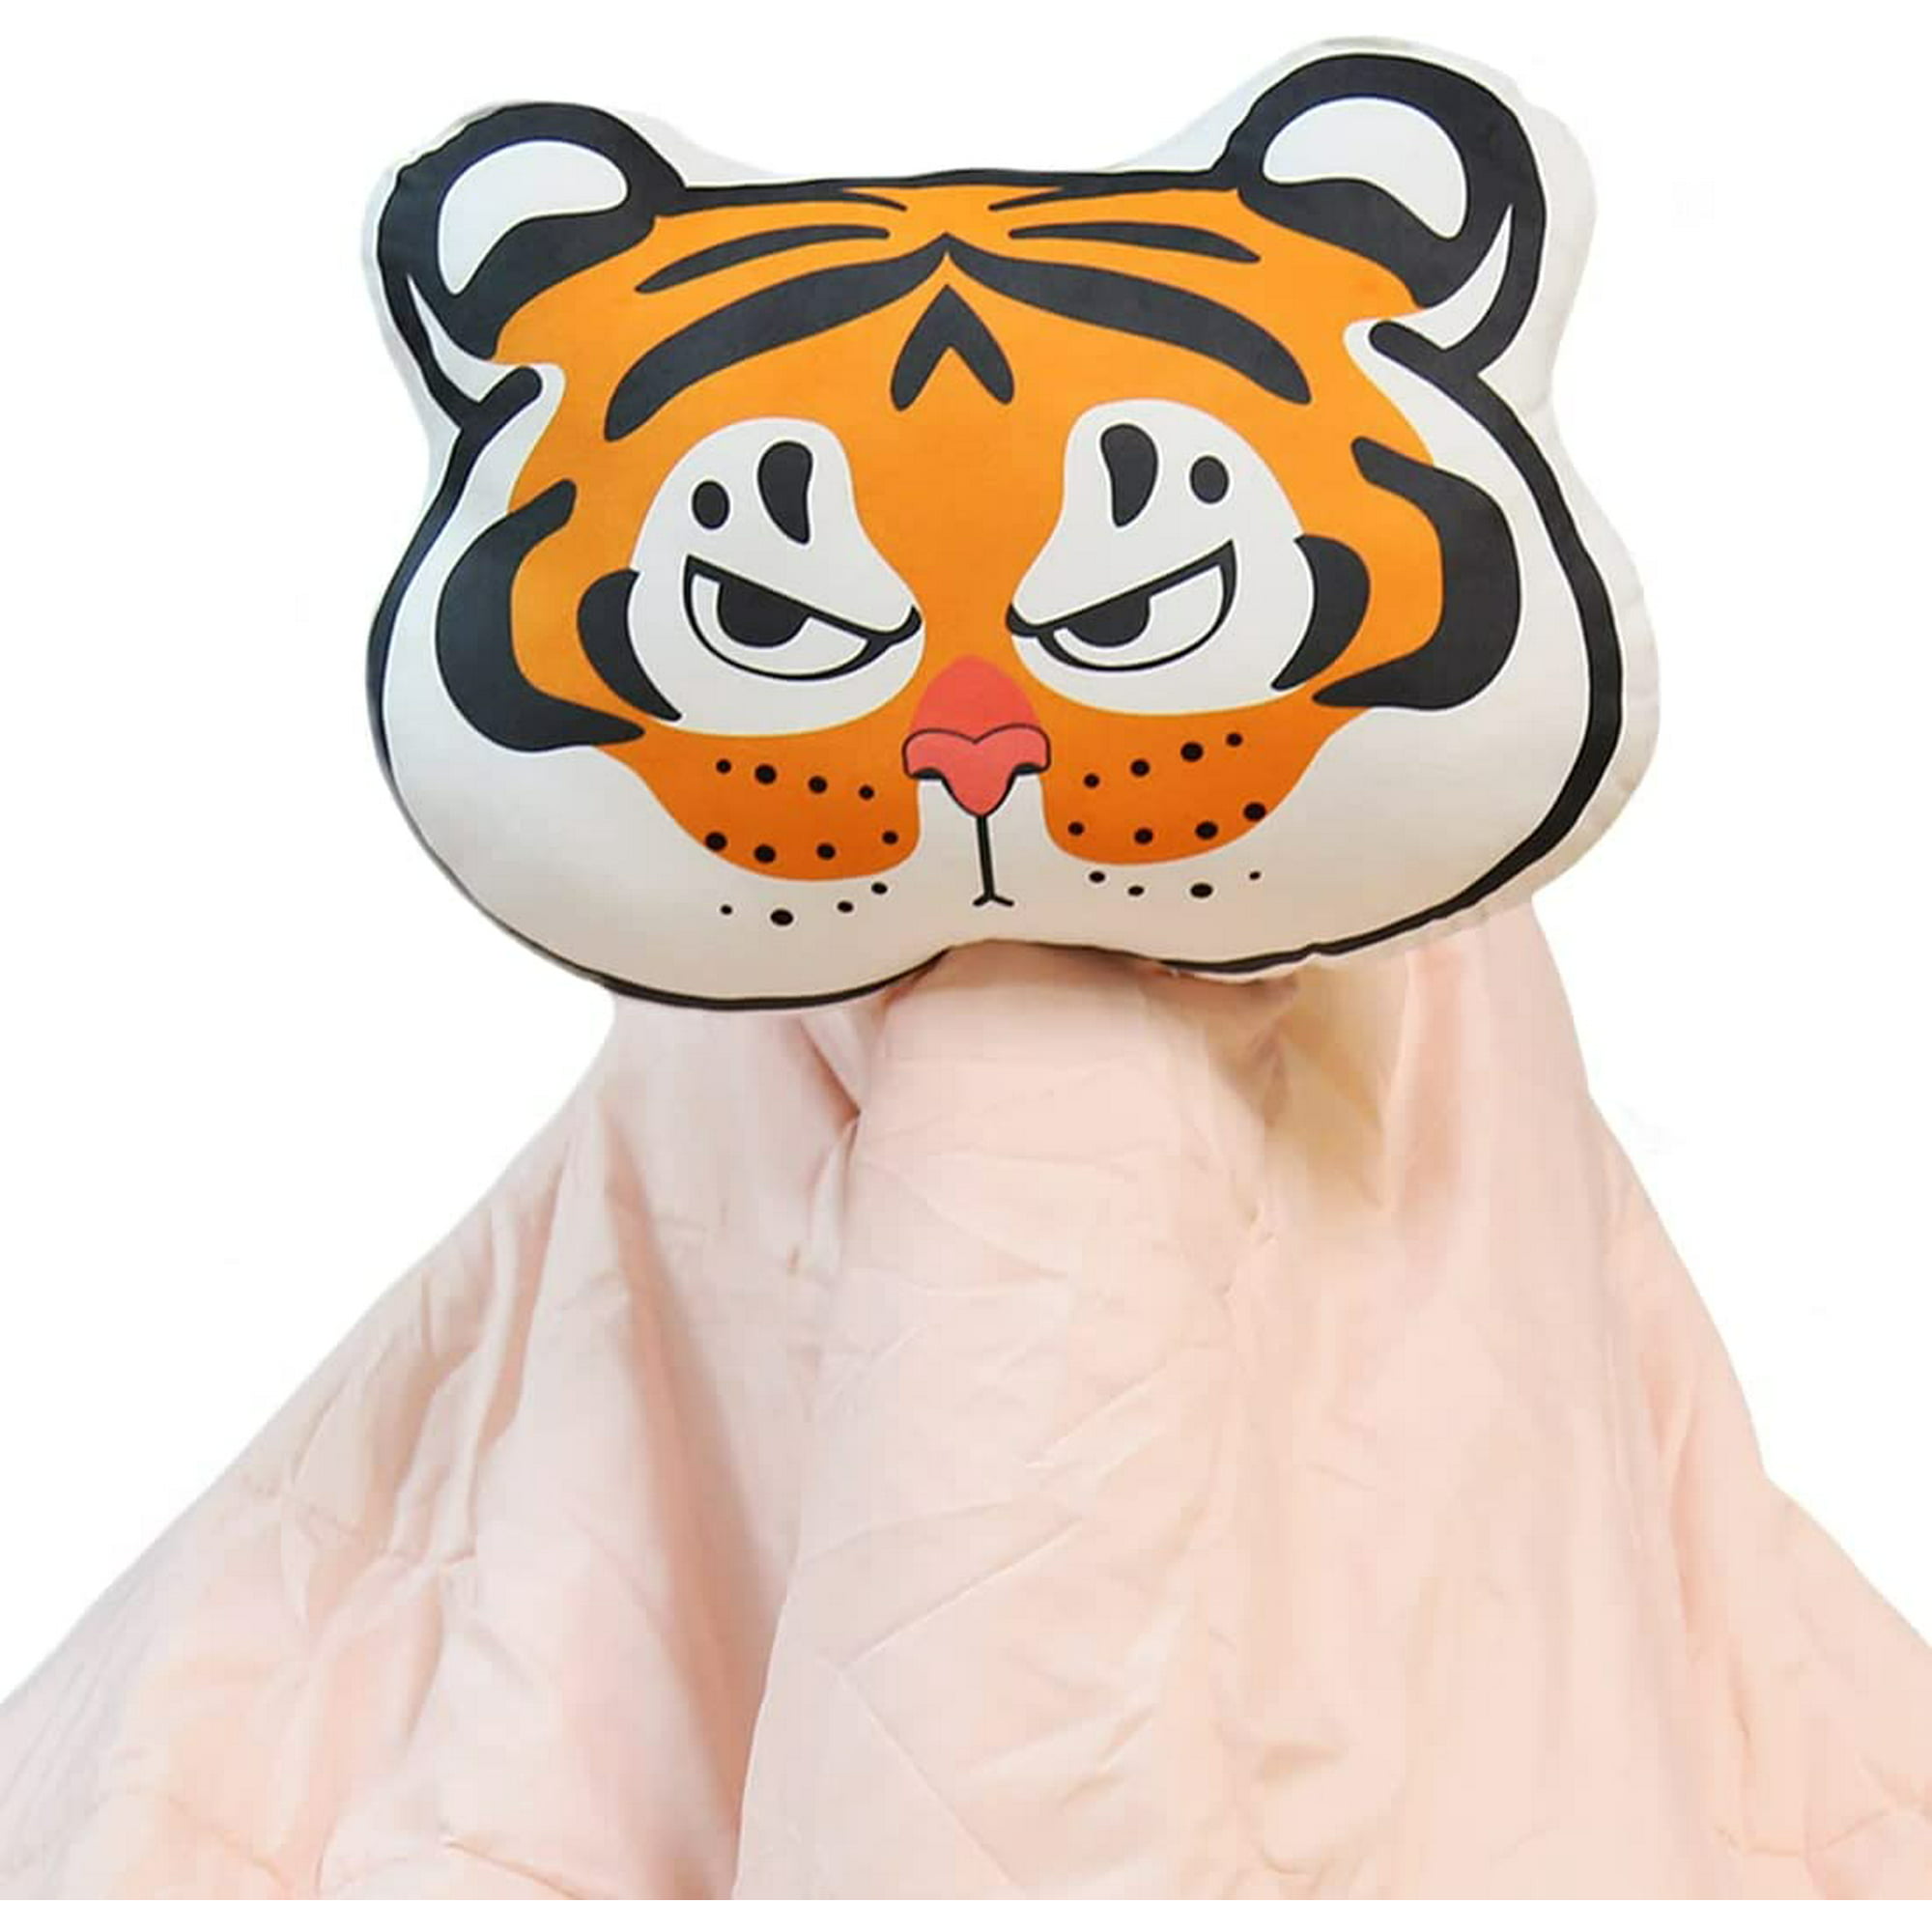 IBAOLEA New Year Tiger Head Plush Toy Pillow Cartoon Tiger Printed Cushion  Decor Home Sofa, Soft PP Cotton Tiger Plushie Cute Dolls Gifts for Boys  Girls Children Xmas Birthday Tiger-anger - |